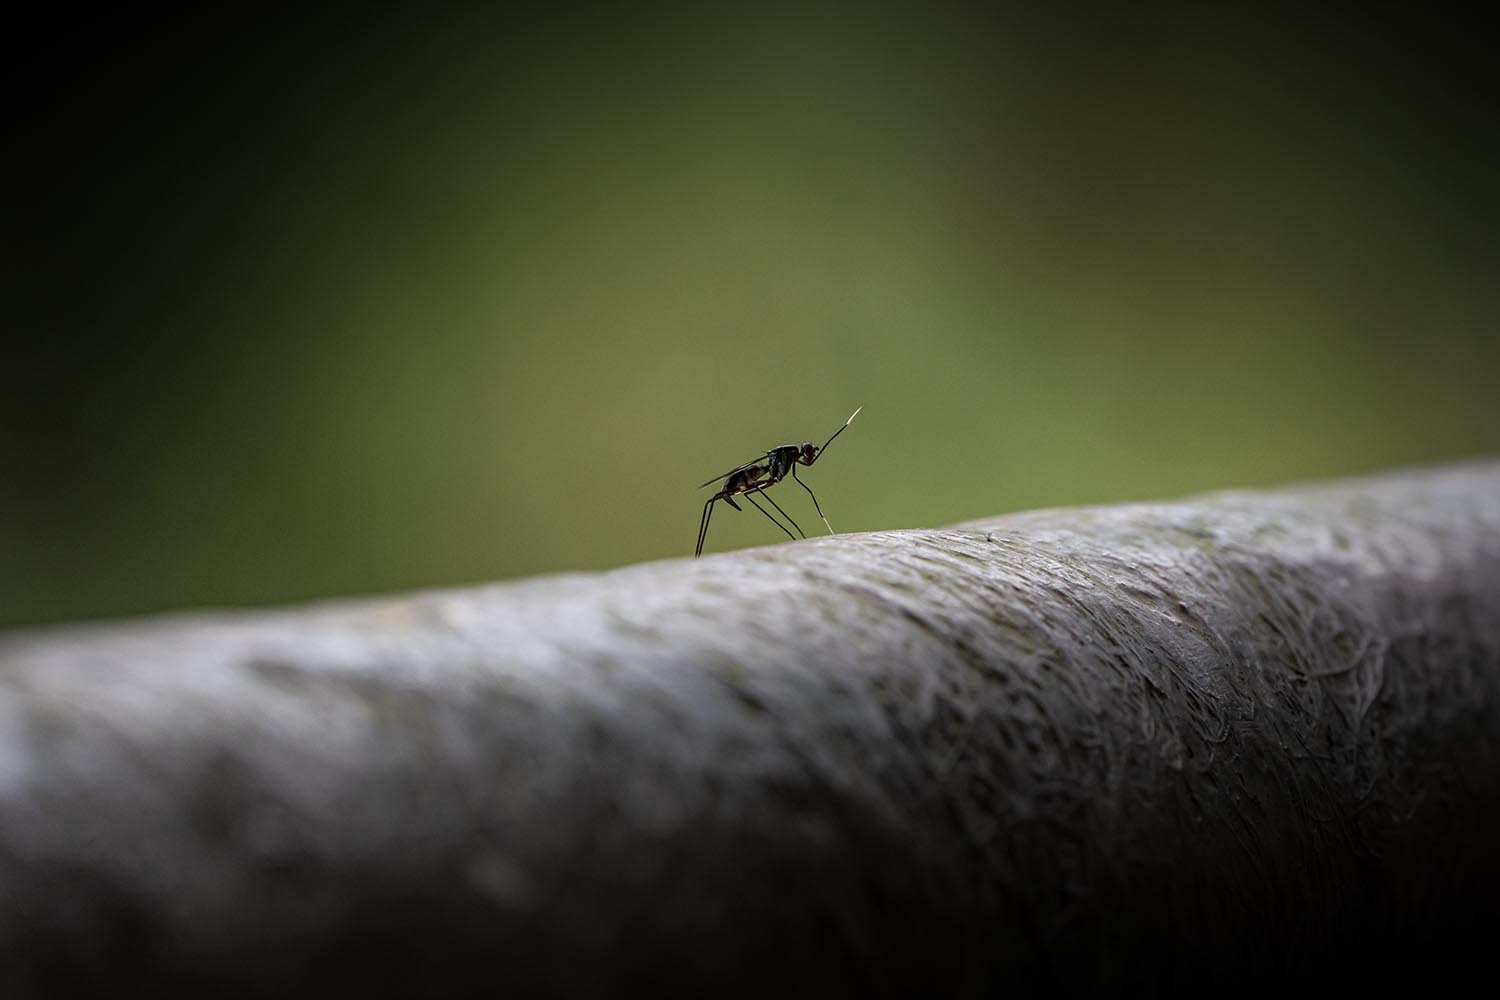 An ant on a branch waving a white-tipped leg in the air